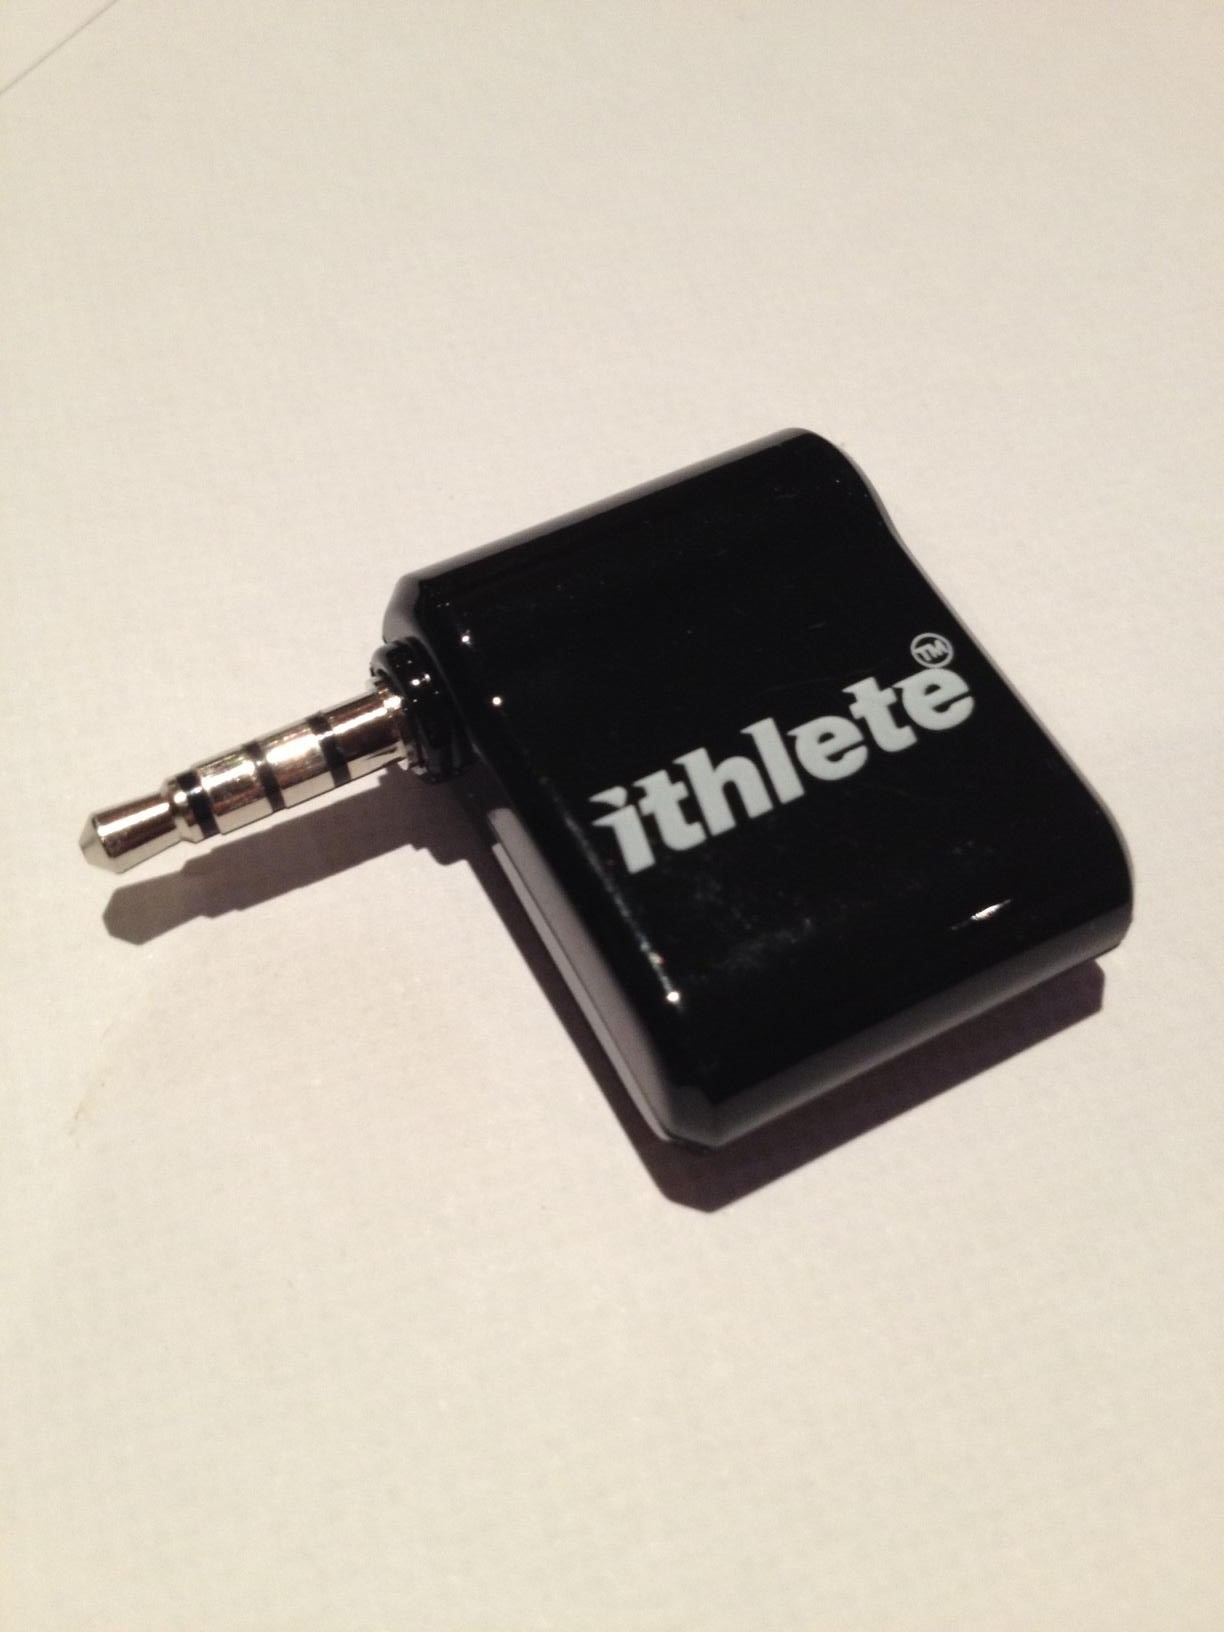 Introducing the improved ithlete ECG receiver